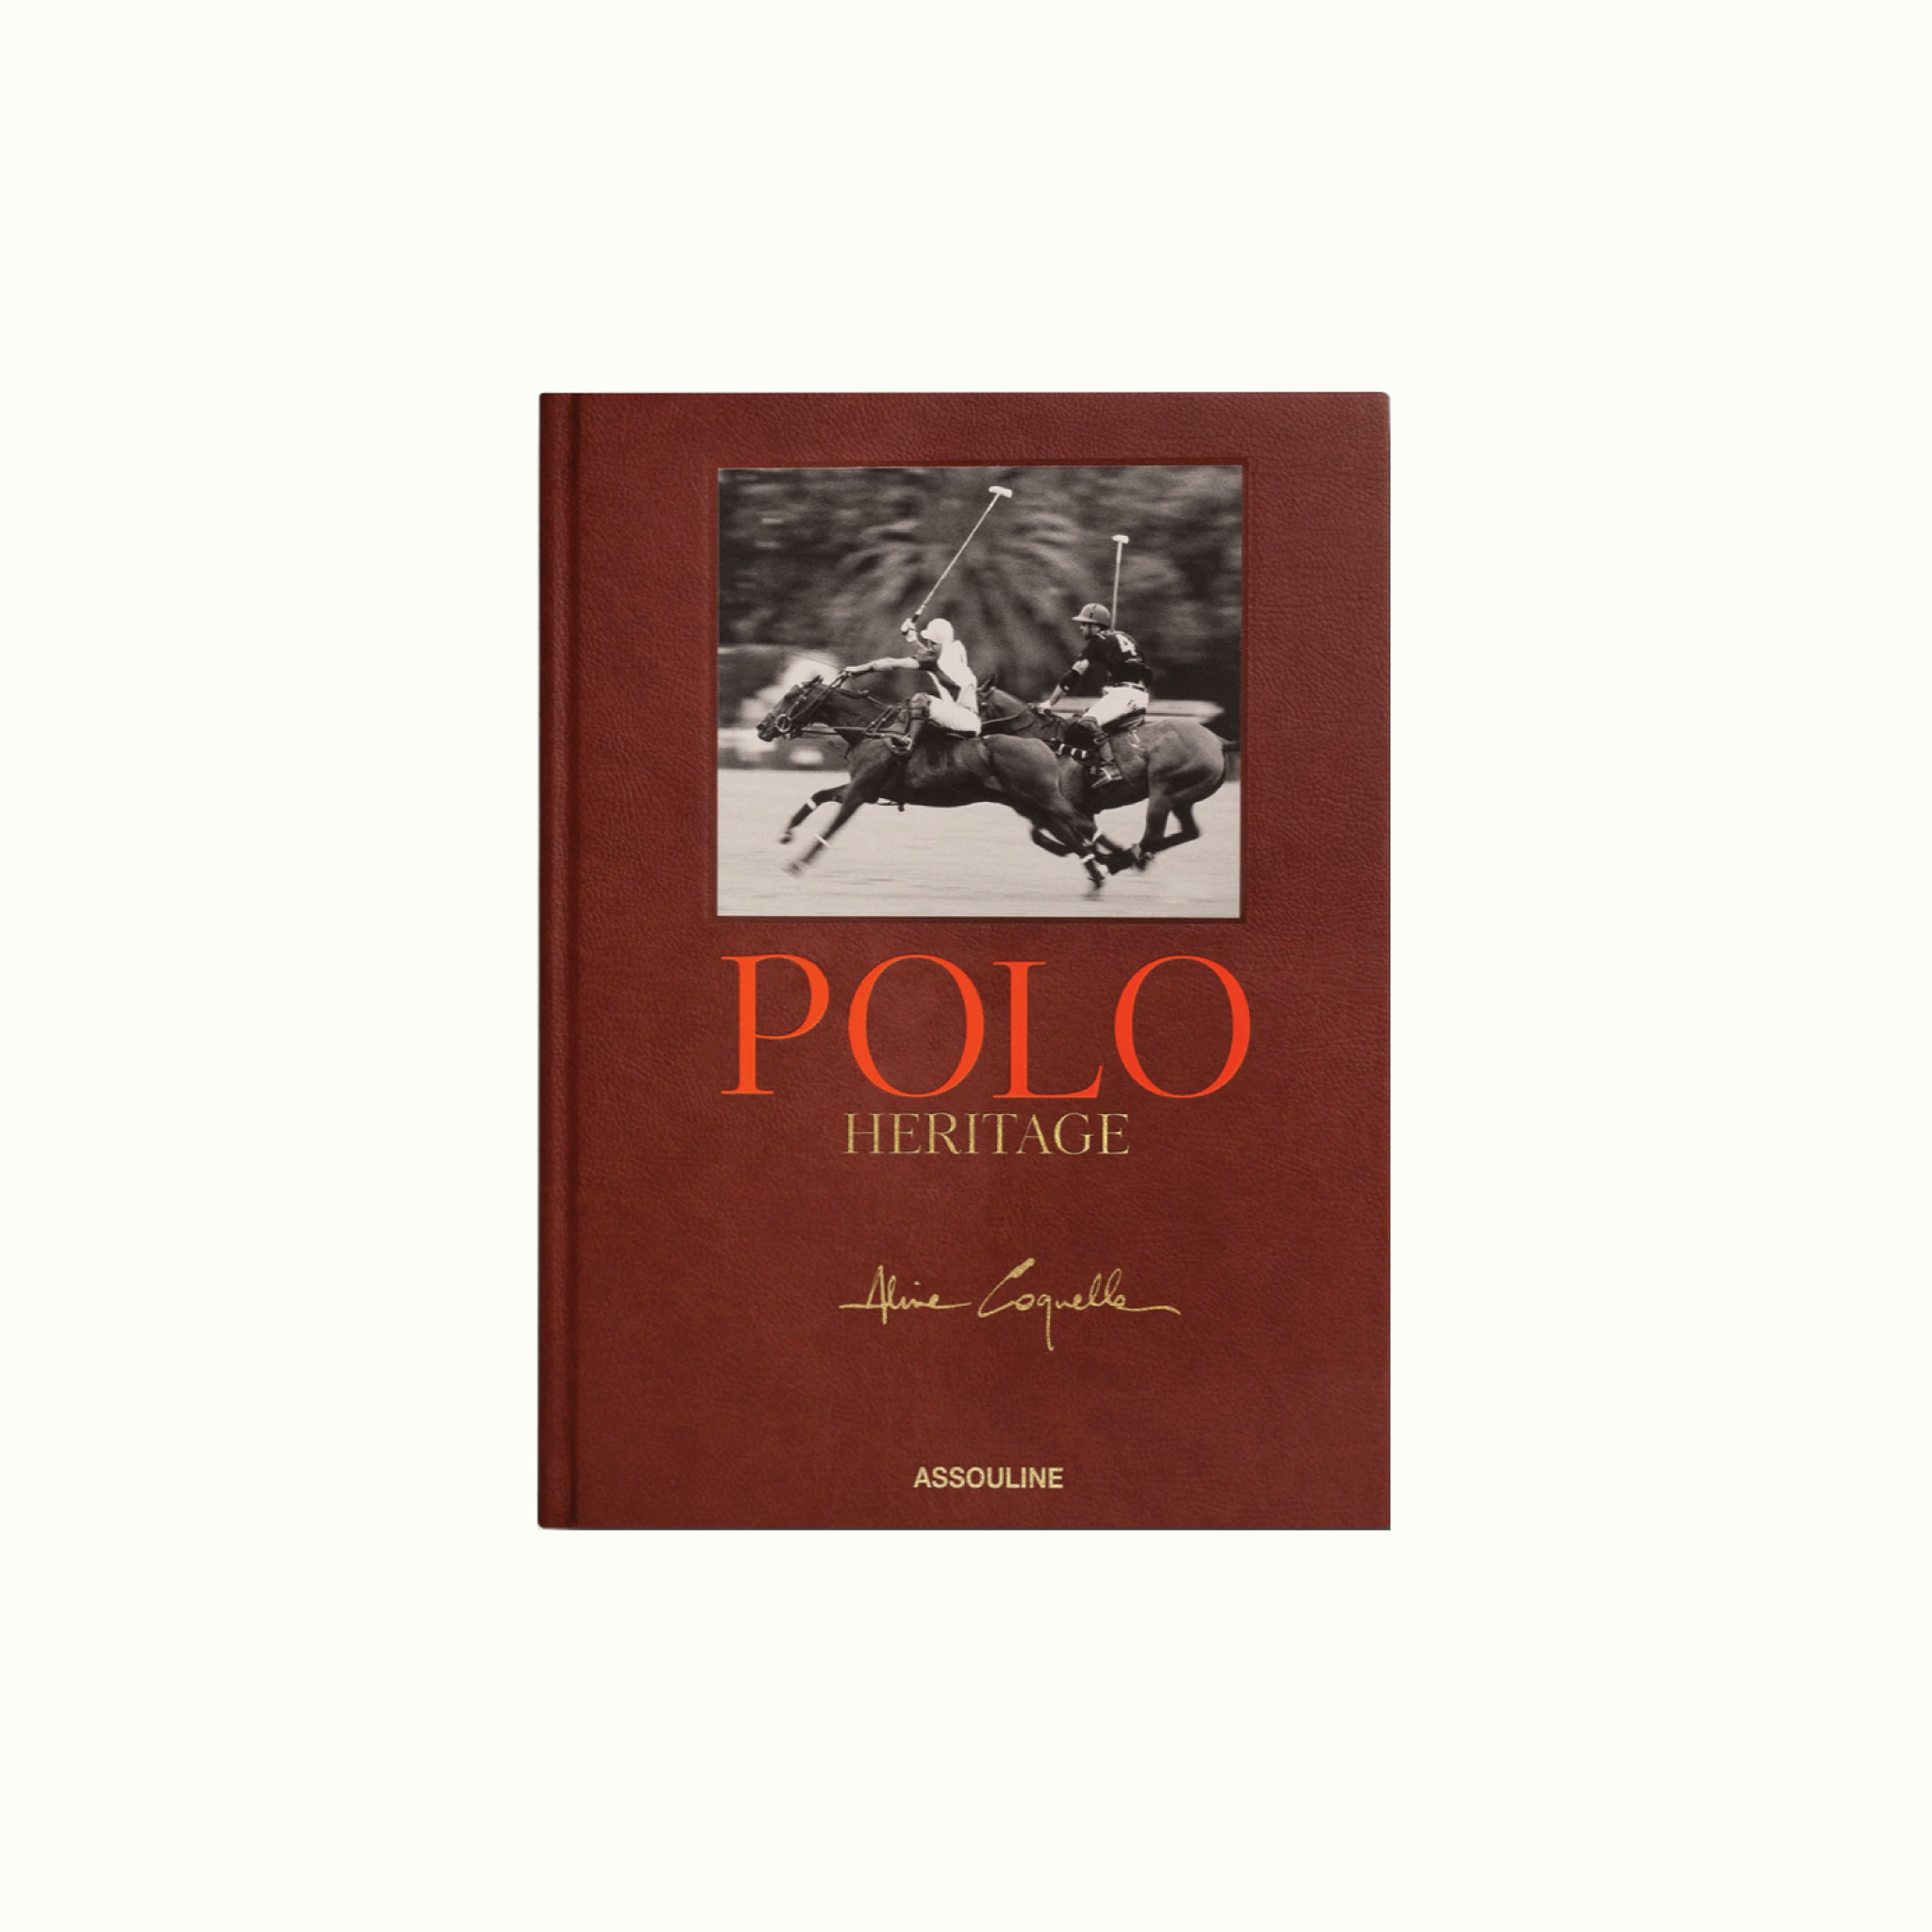 Polo Heritage Book Aline Coquelle for Hotel Ynez Solvang by Nomada Deco